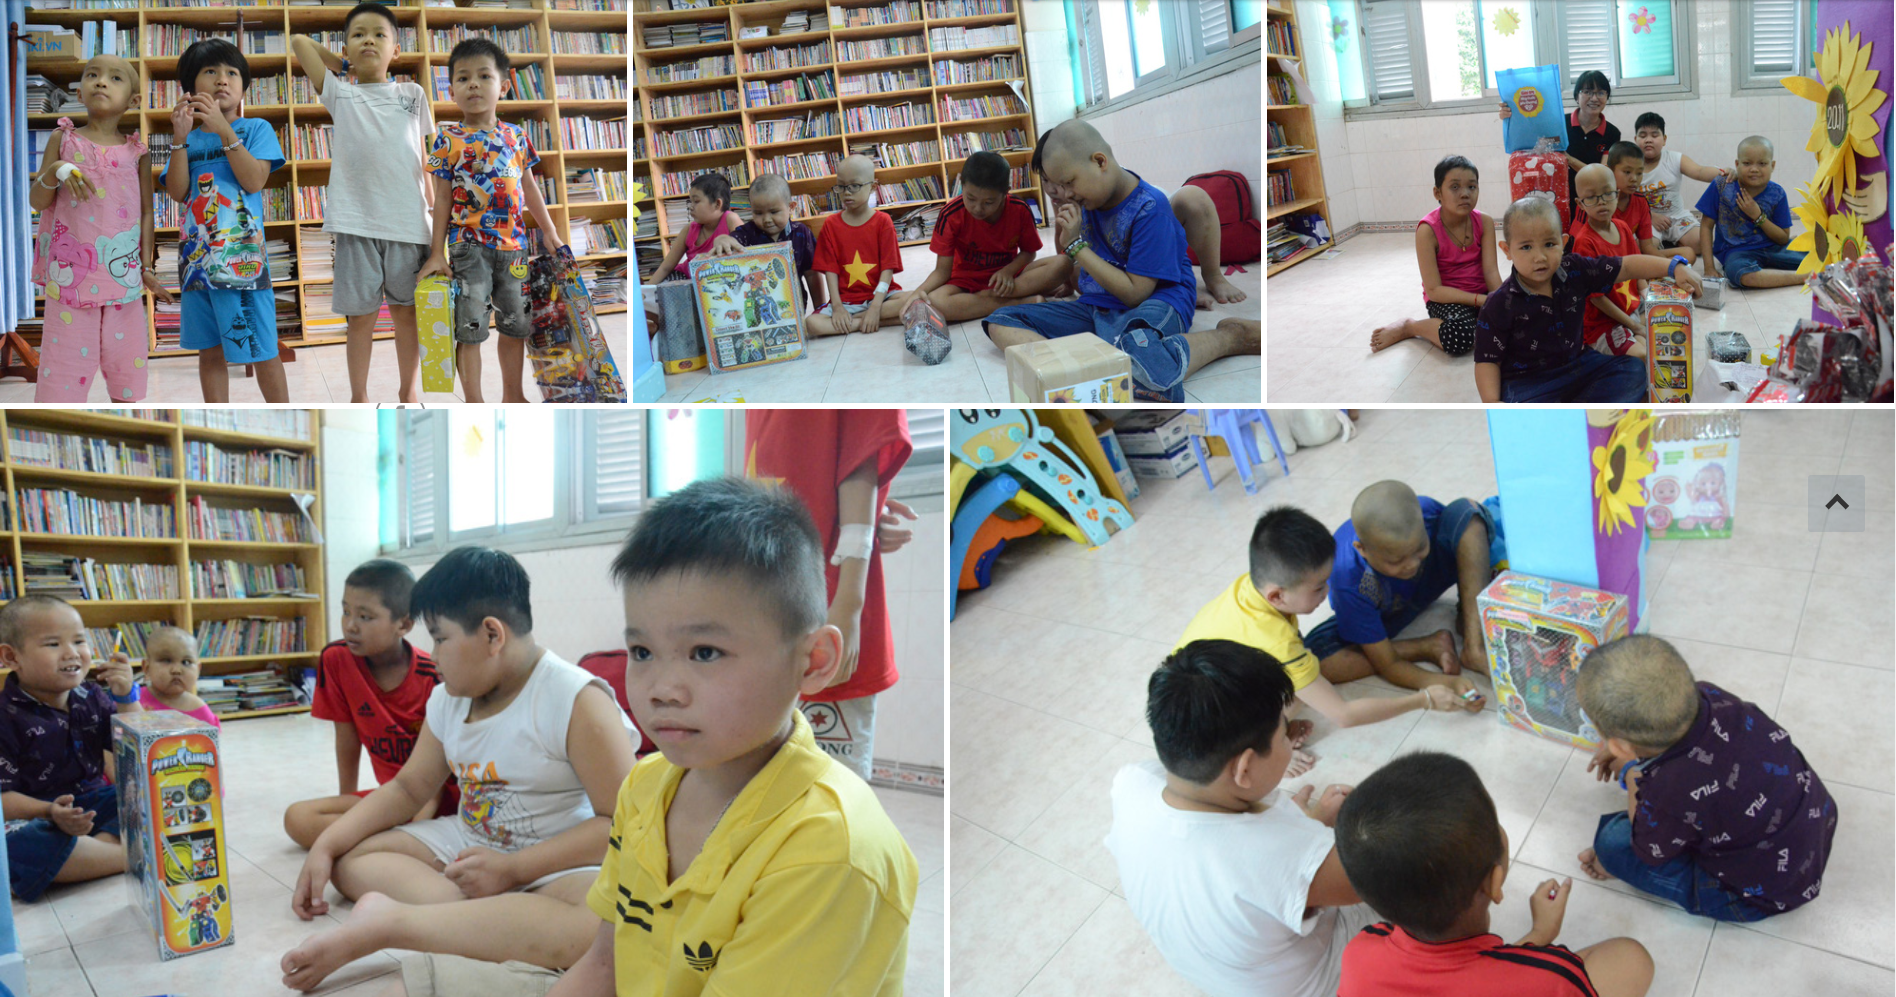 The common room at Ho Chi Minh City Oncology Hospital is a place where children expect their gifts. Photo: Uyen Trinh / Tuoi Tre.